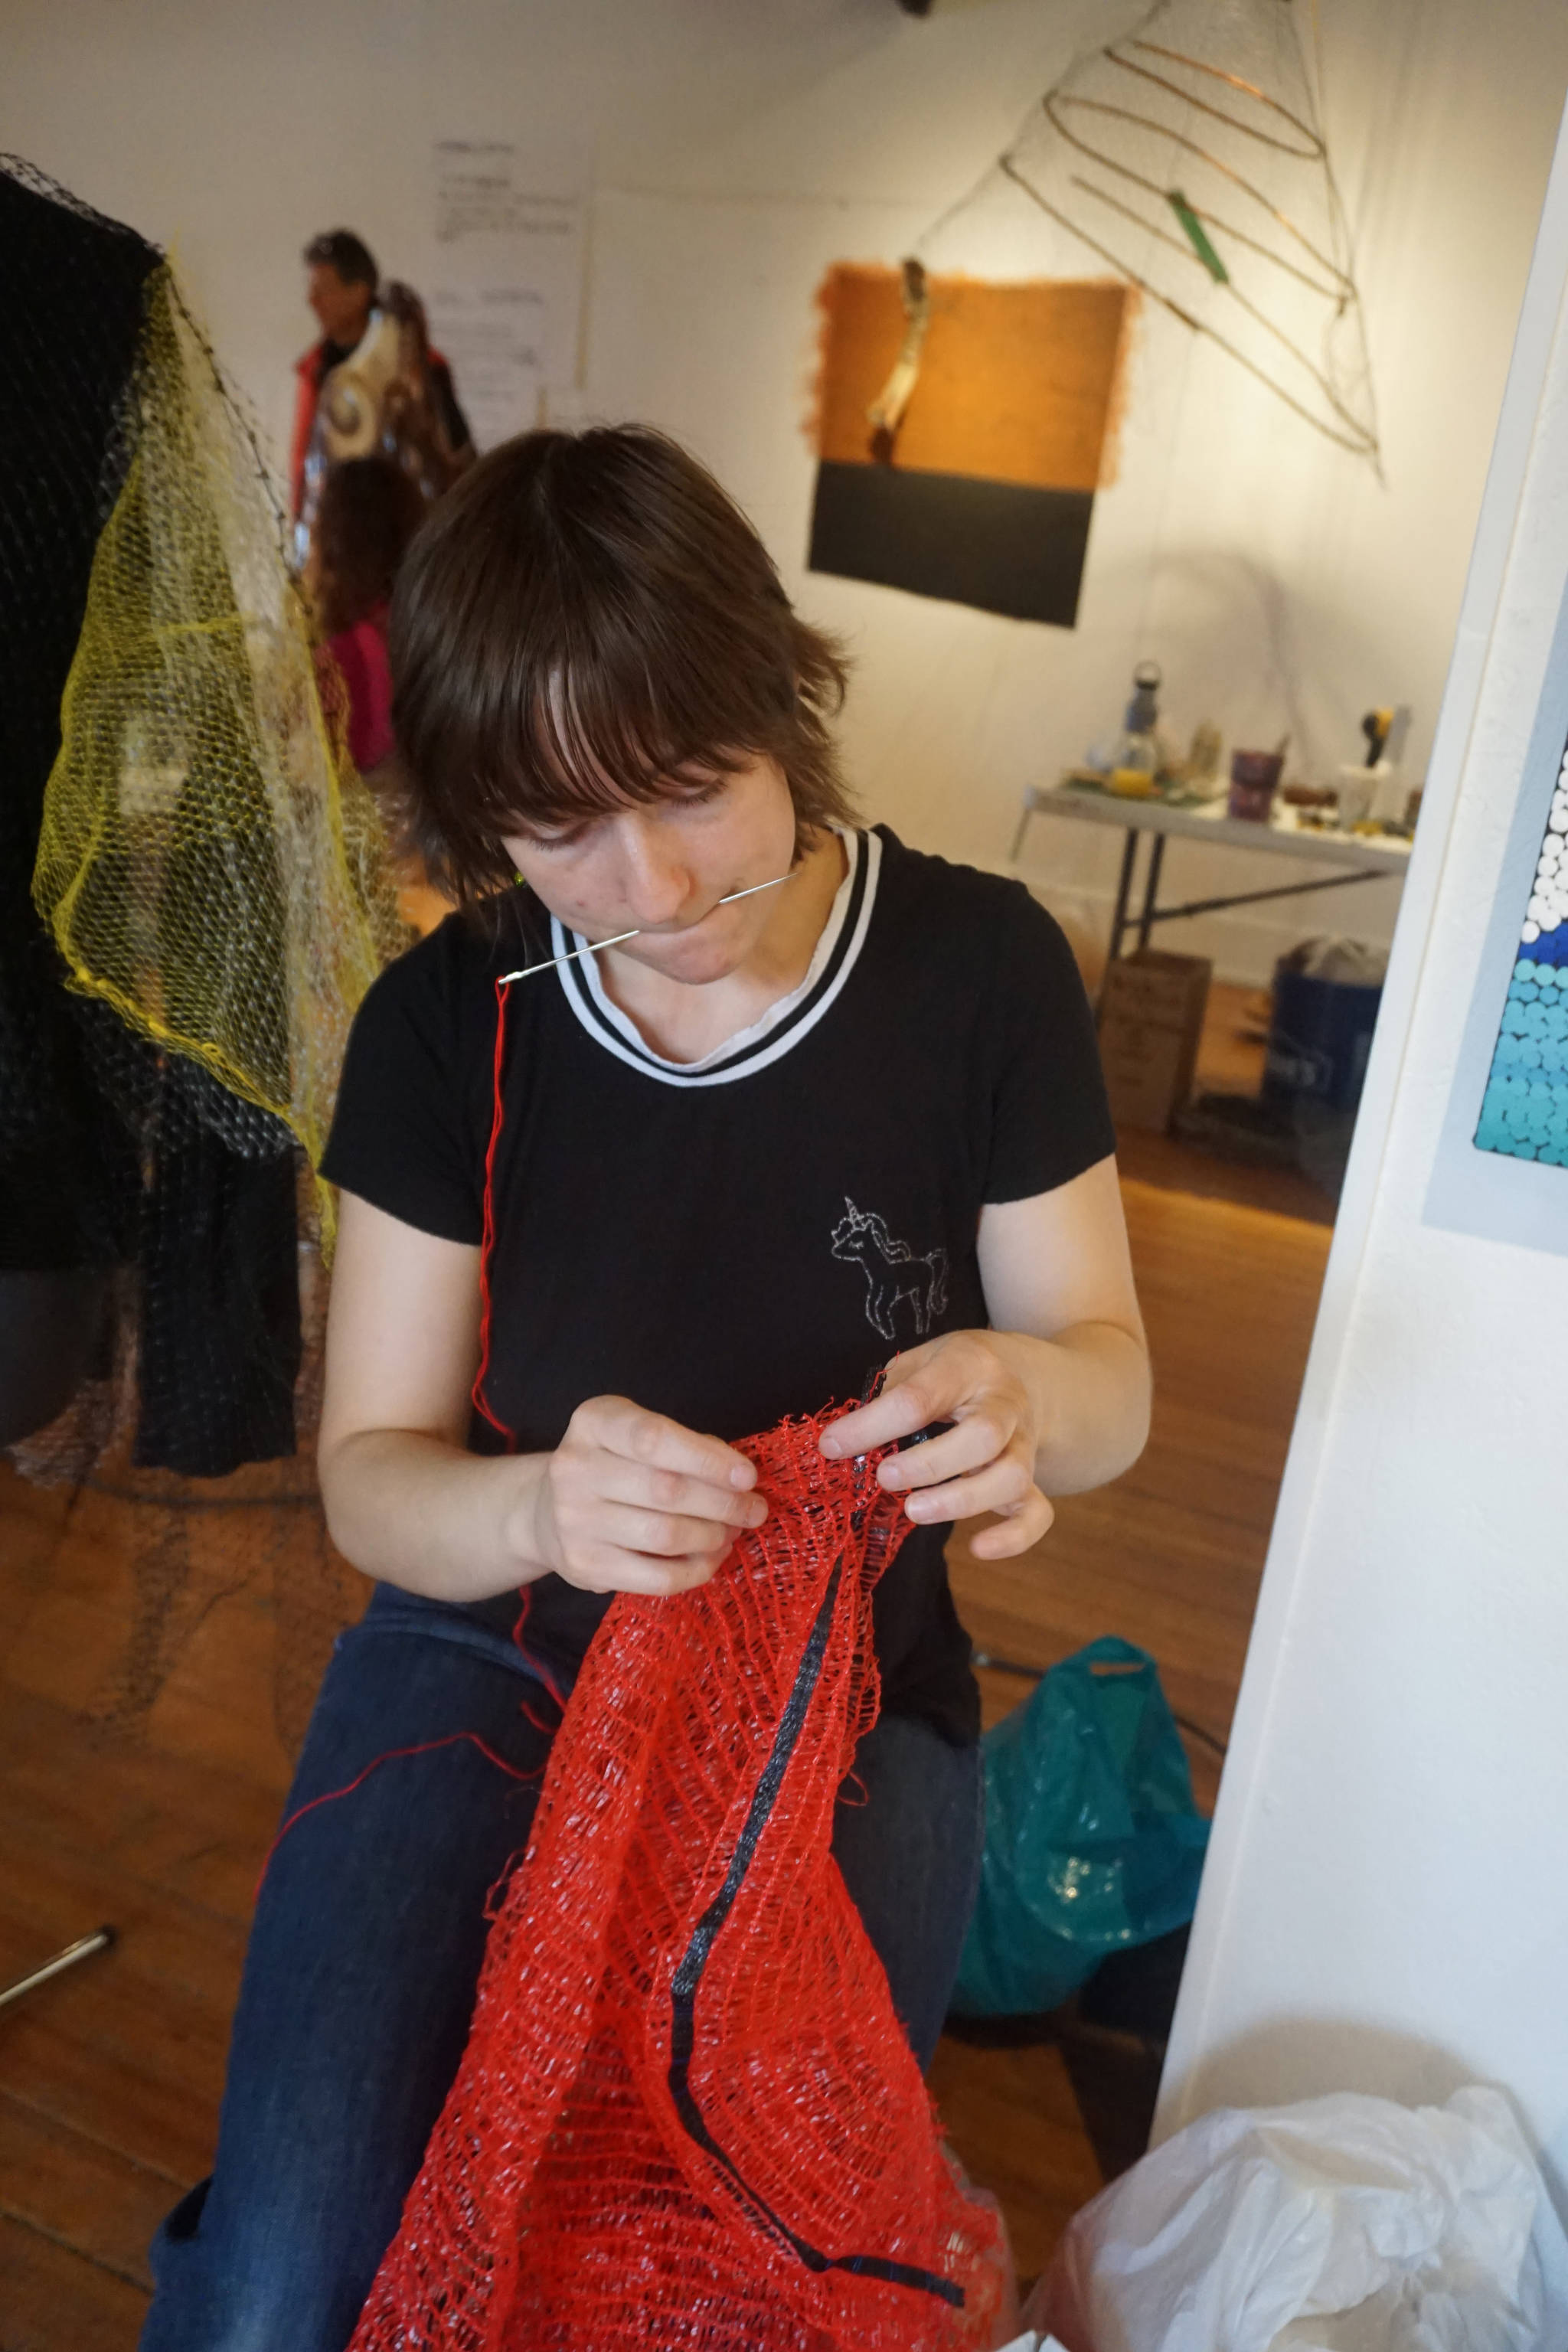 Mallory Drover works on a Wearable Arts piece Saturday, Oct. 14, 2017 at a workshop with Sheila Wyne at the Bunnell Street Arts Center in Homer, Alaska. She tore apart fruit bags as dress material. Drover is a Homer student and a visual arts major attending Antioch College, Yellow Springs, Ohio. She took Wyne’s workshop as part of work study at Antioch. (Photo by Michael Armstrong)